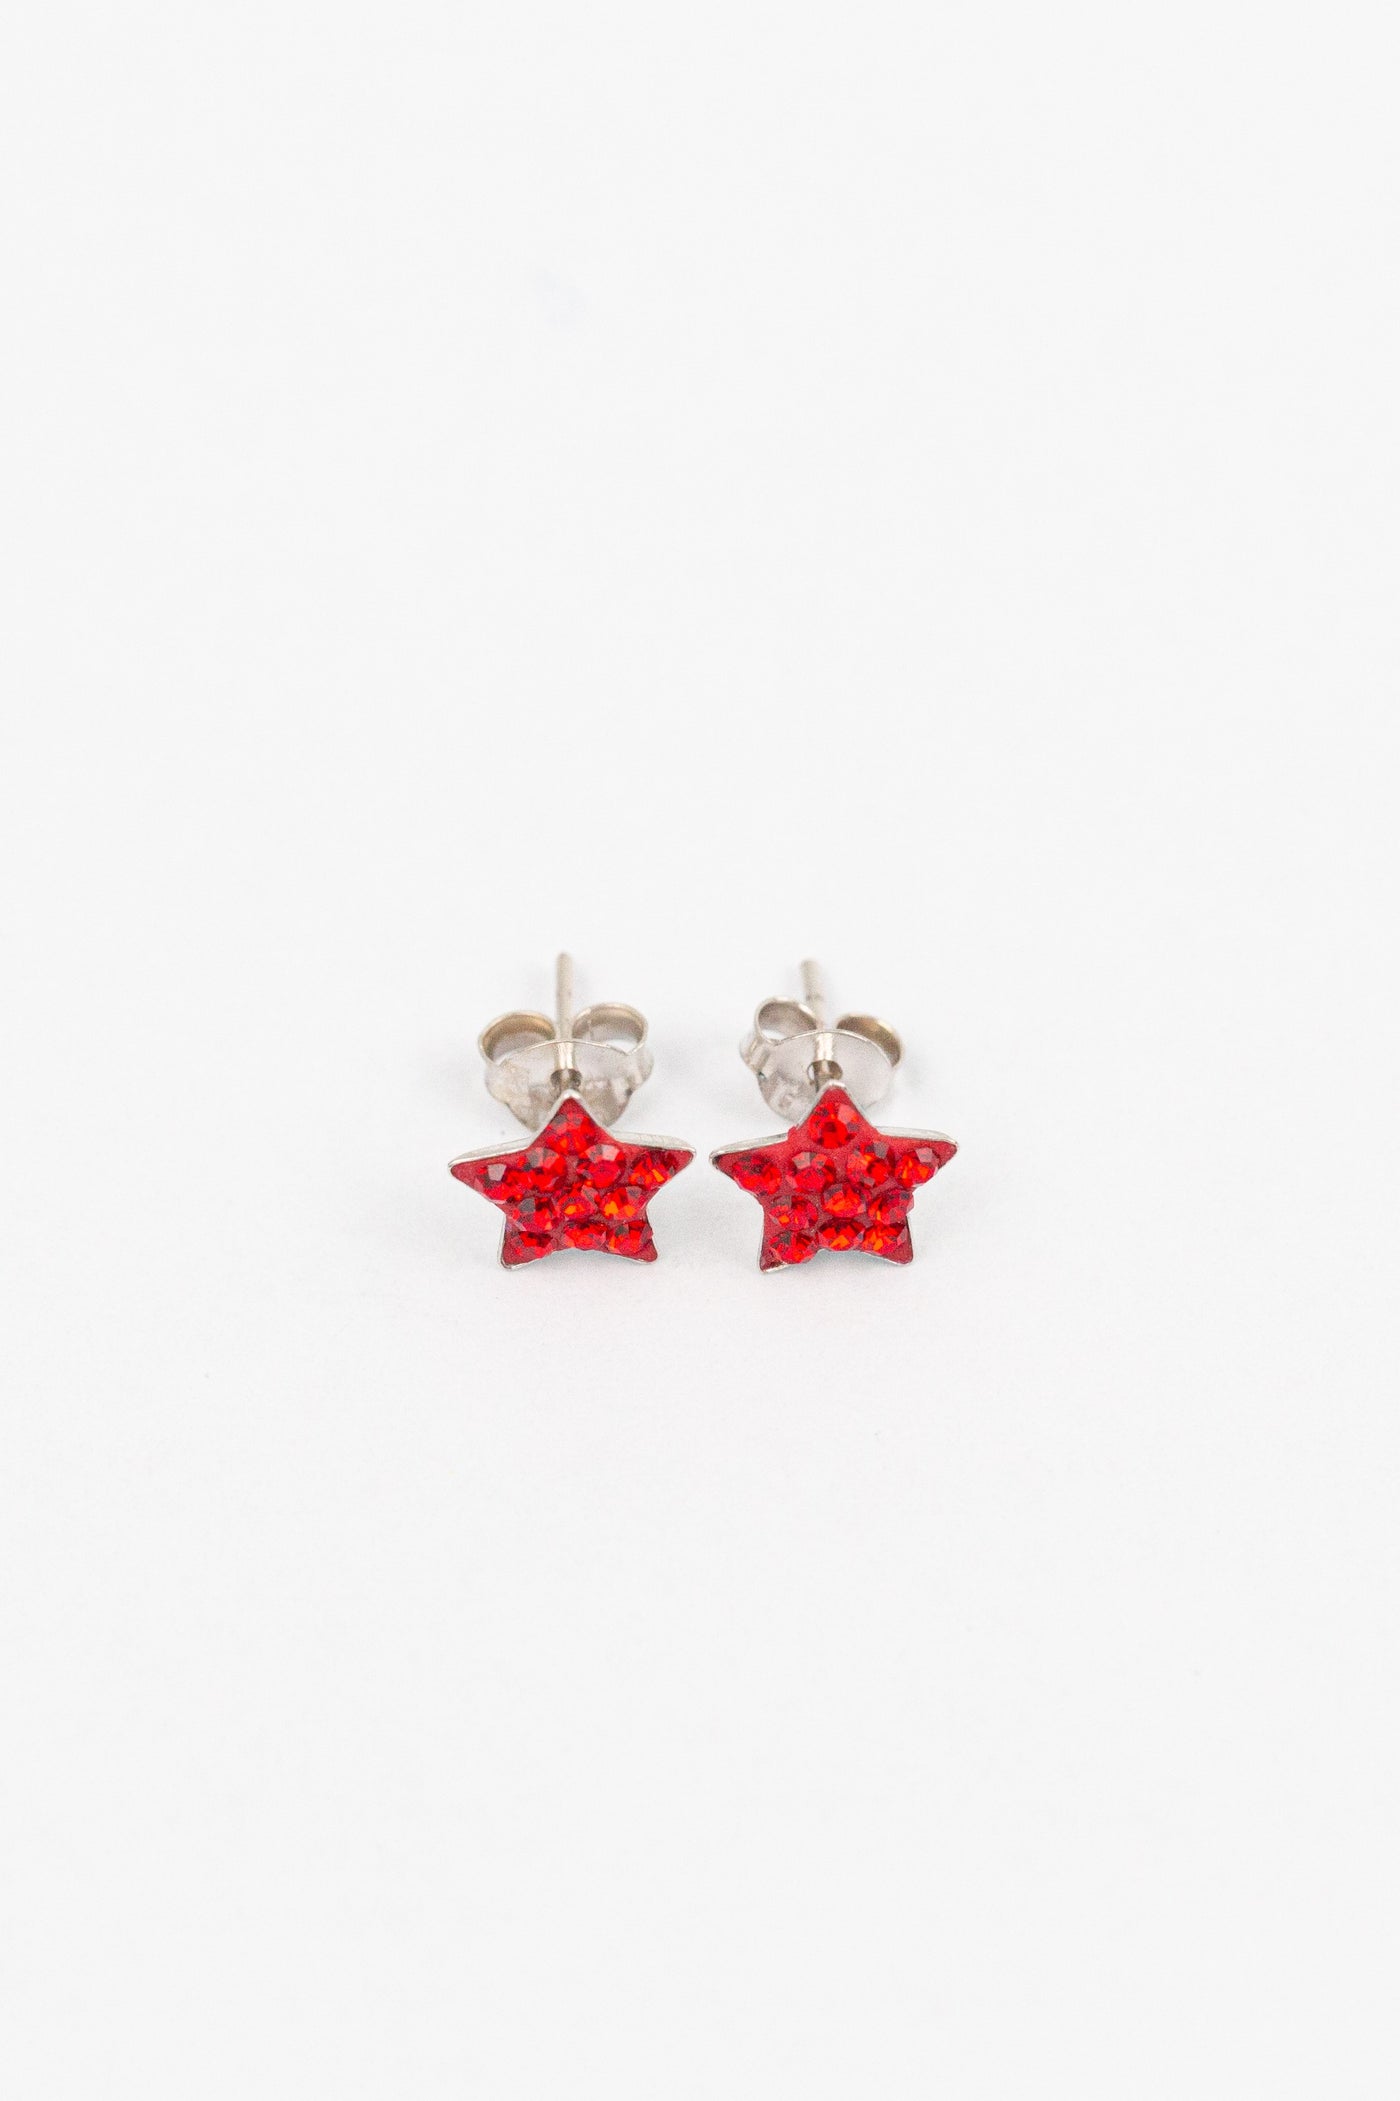 Crystal Star Pave Stud Silver Earrings in Light Siam Red | Annie and Sisters| sister stud earrings, for kids, children's jewelry, kids jewelry, best friend 